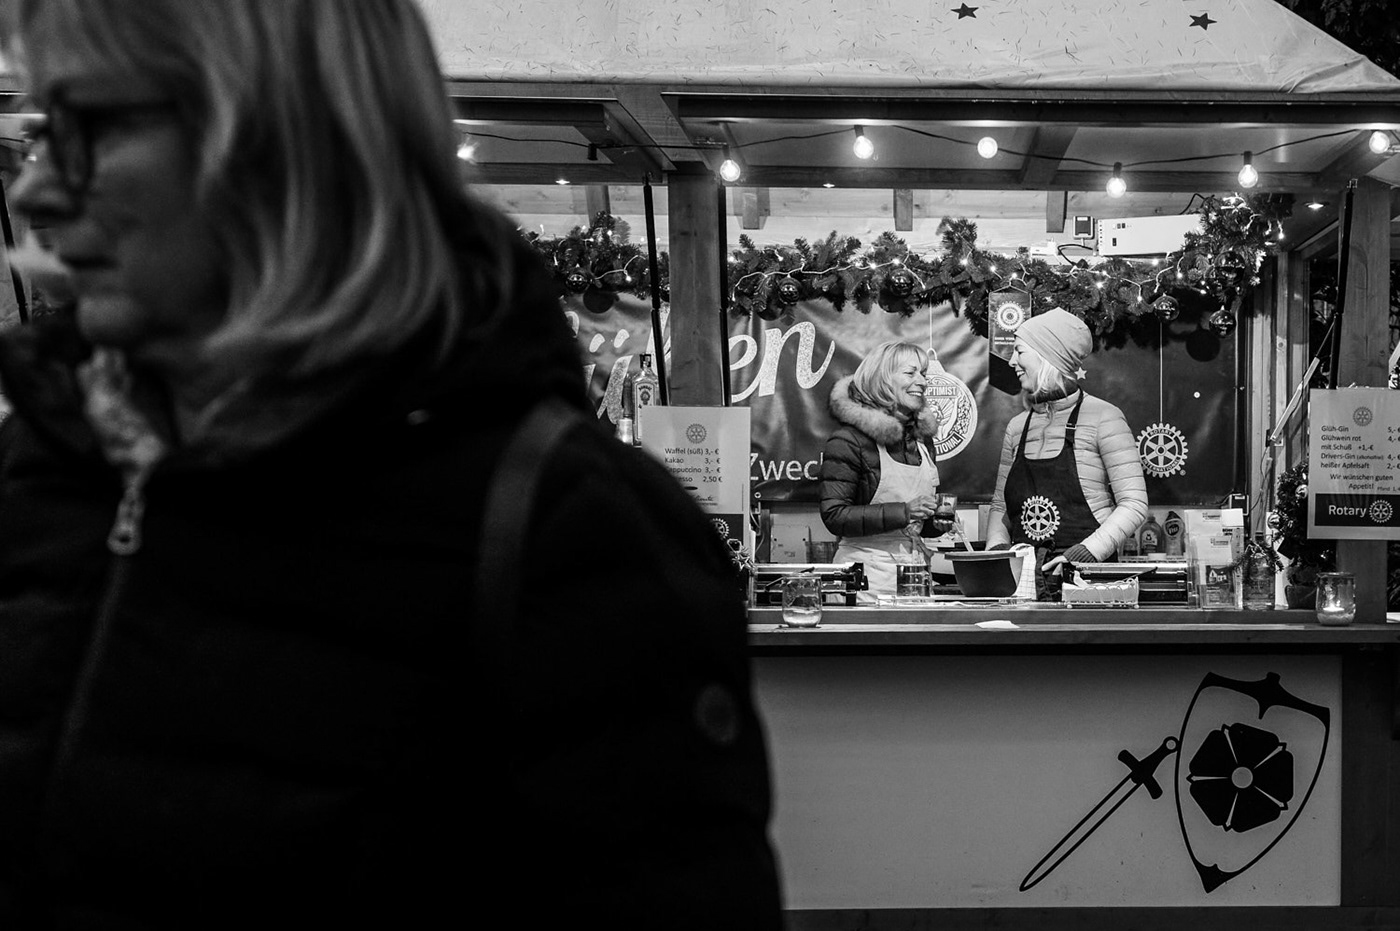 Street people black and white street photography Weihnachtsmarkt Christmas market xmas germany osnabruck